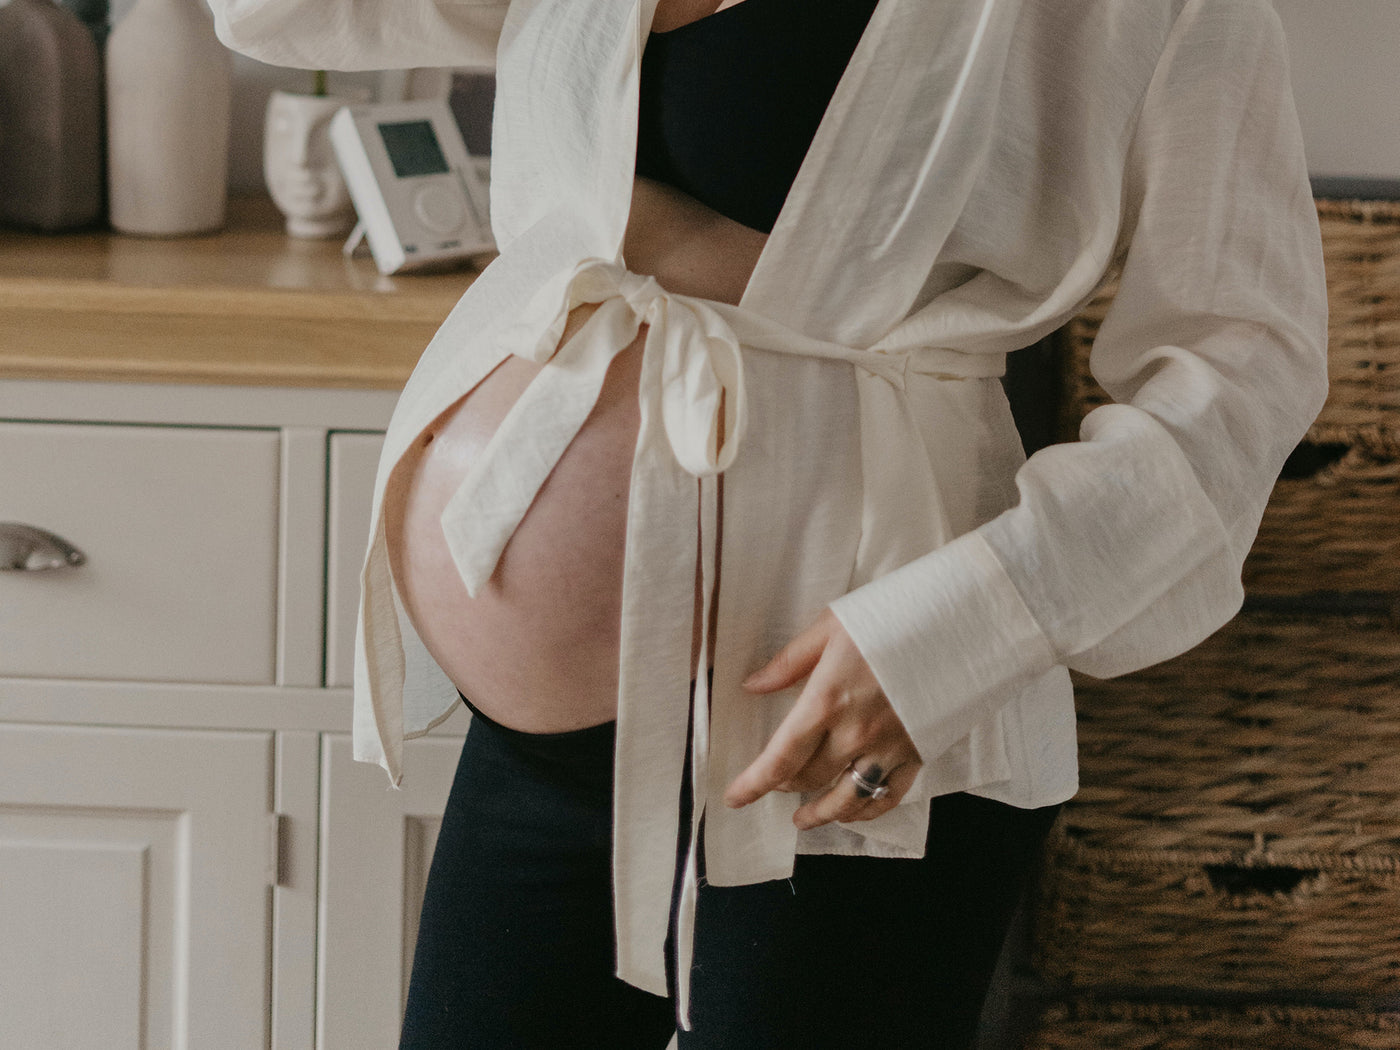 These are the best webshops and stores for maternity clothes!